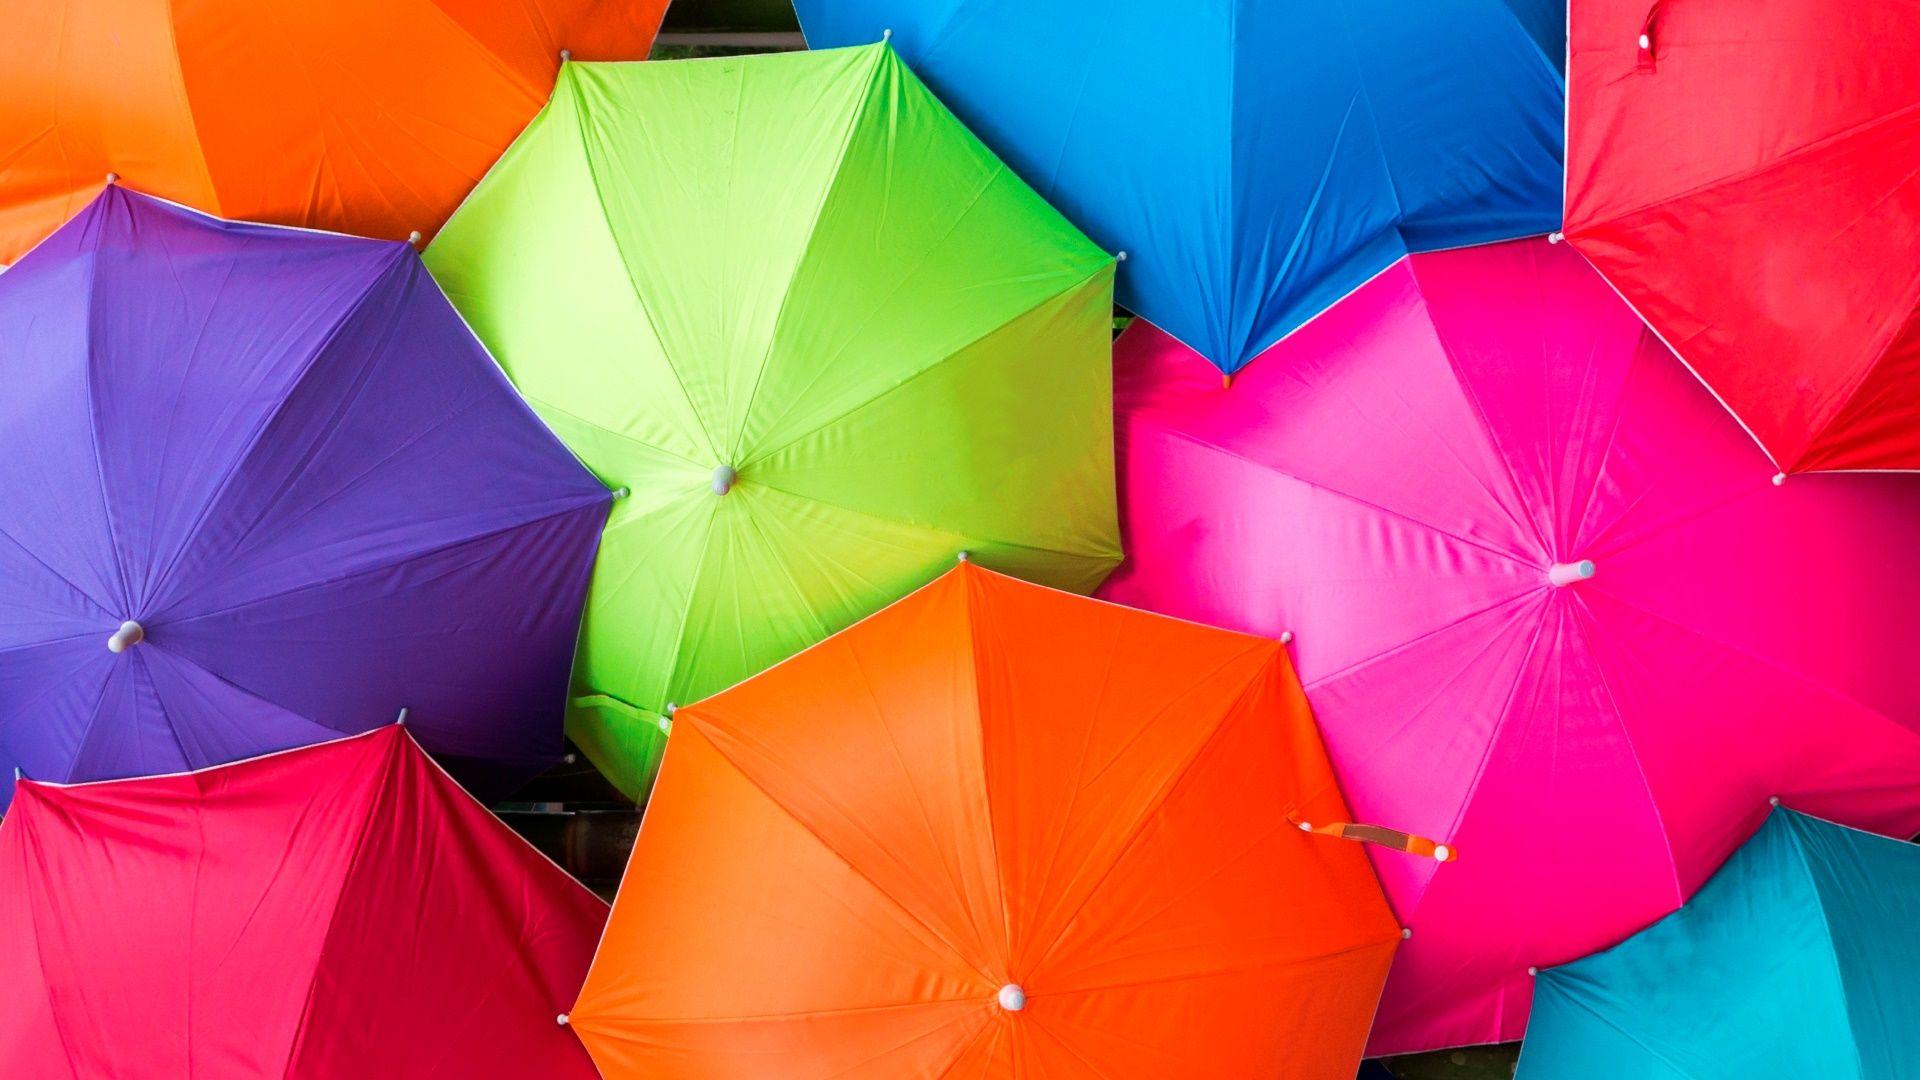 Colorful Umbrella Wallpapers Top Free Colorful Umbrella Backgrounds Wallpaperaccess